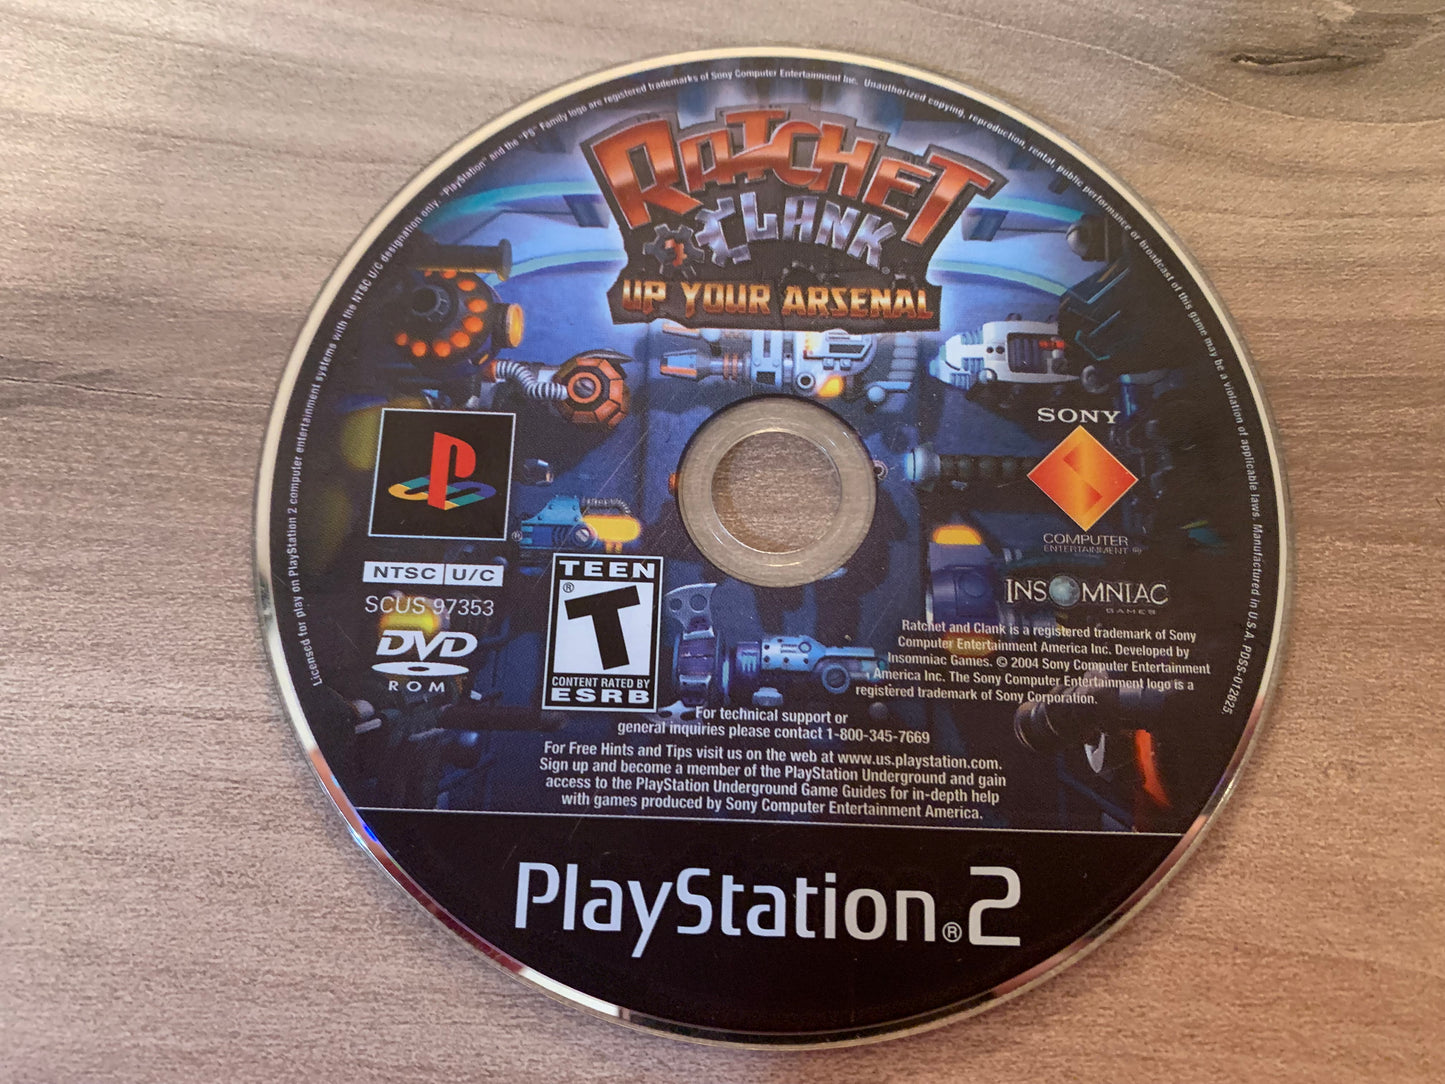 SONY PLAYSTATiON 2 [PS2] | RATCHET CLANK UP YOUR ARSENAL